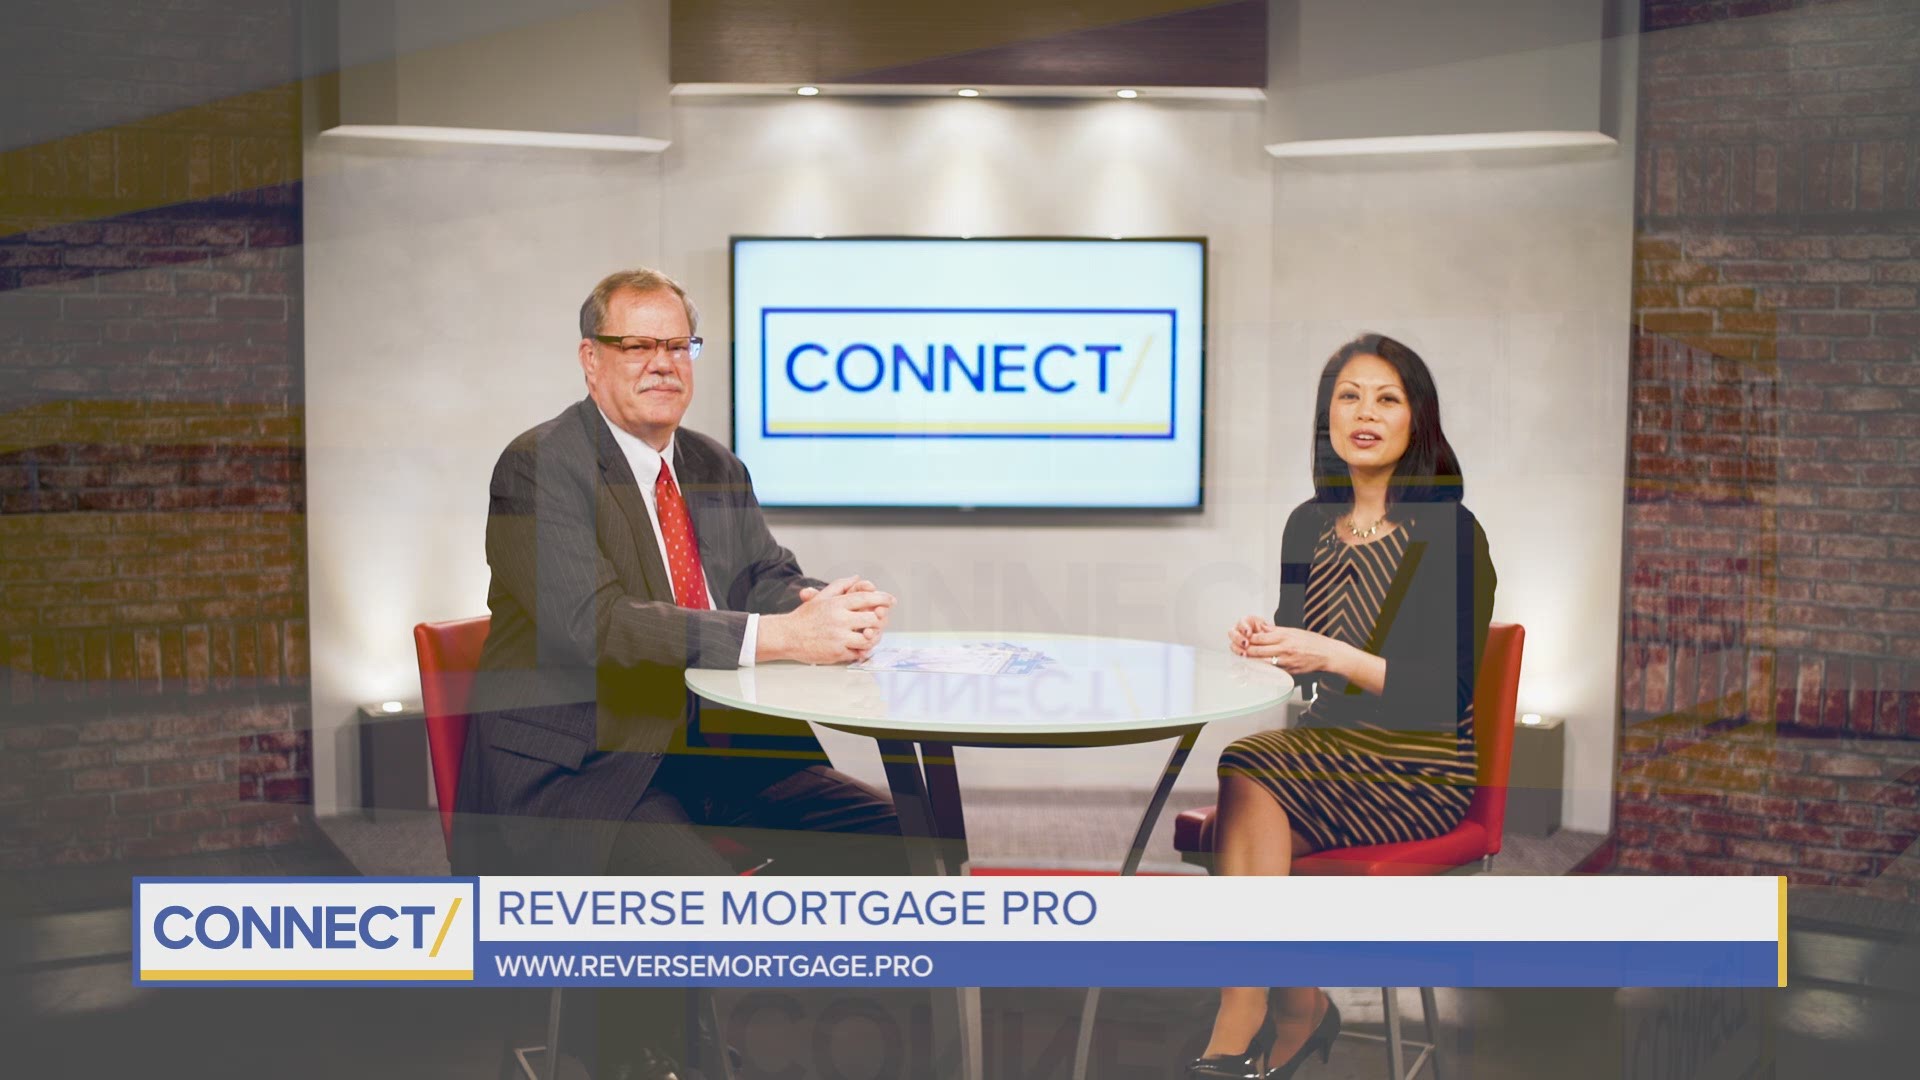 We continued our conversation about the benefits of a reverse mortgage.